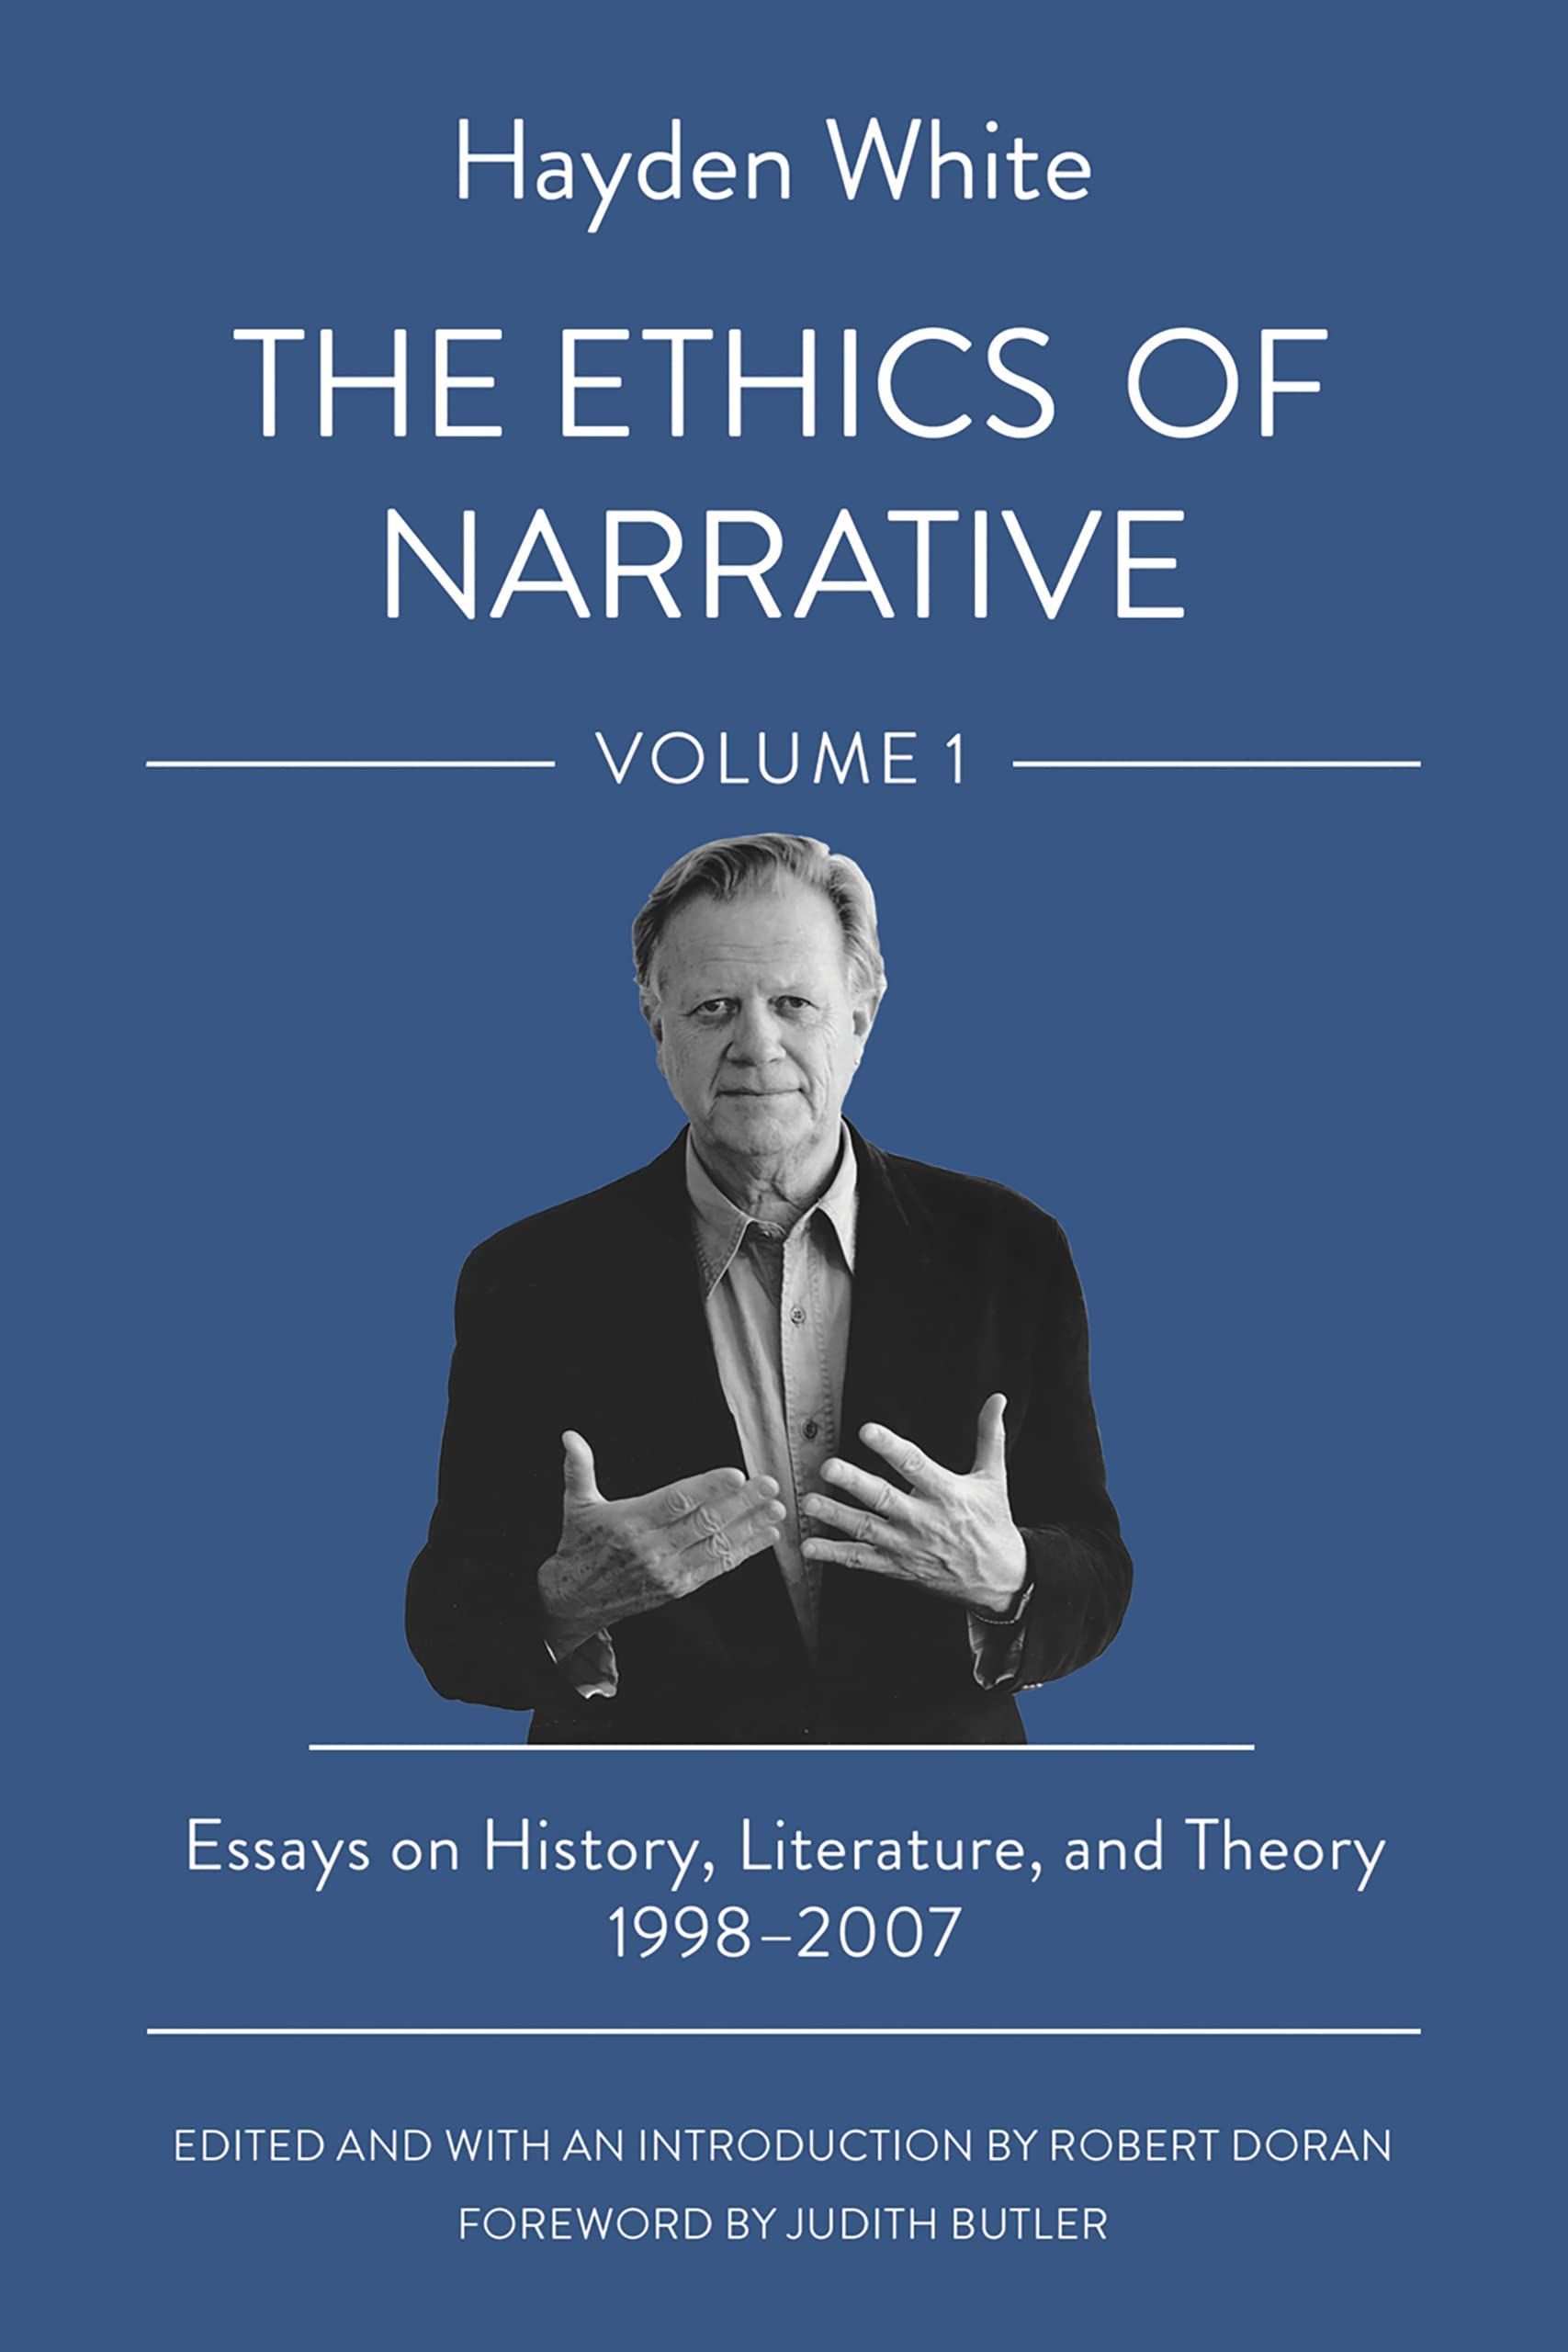 The Ironic Radical: On Hayden White’s “The Ethics of Narrative”